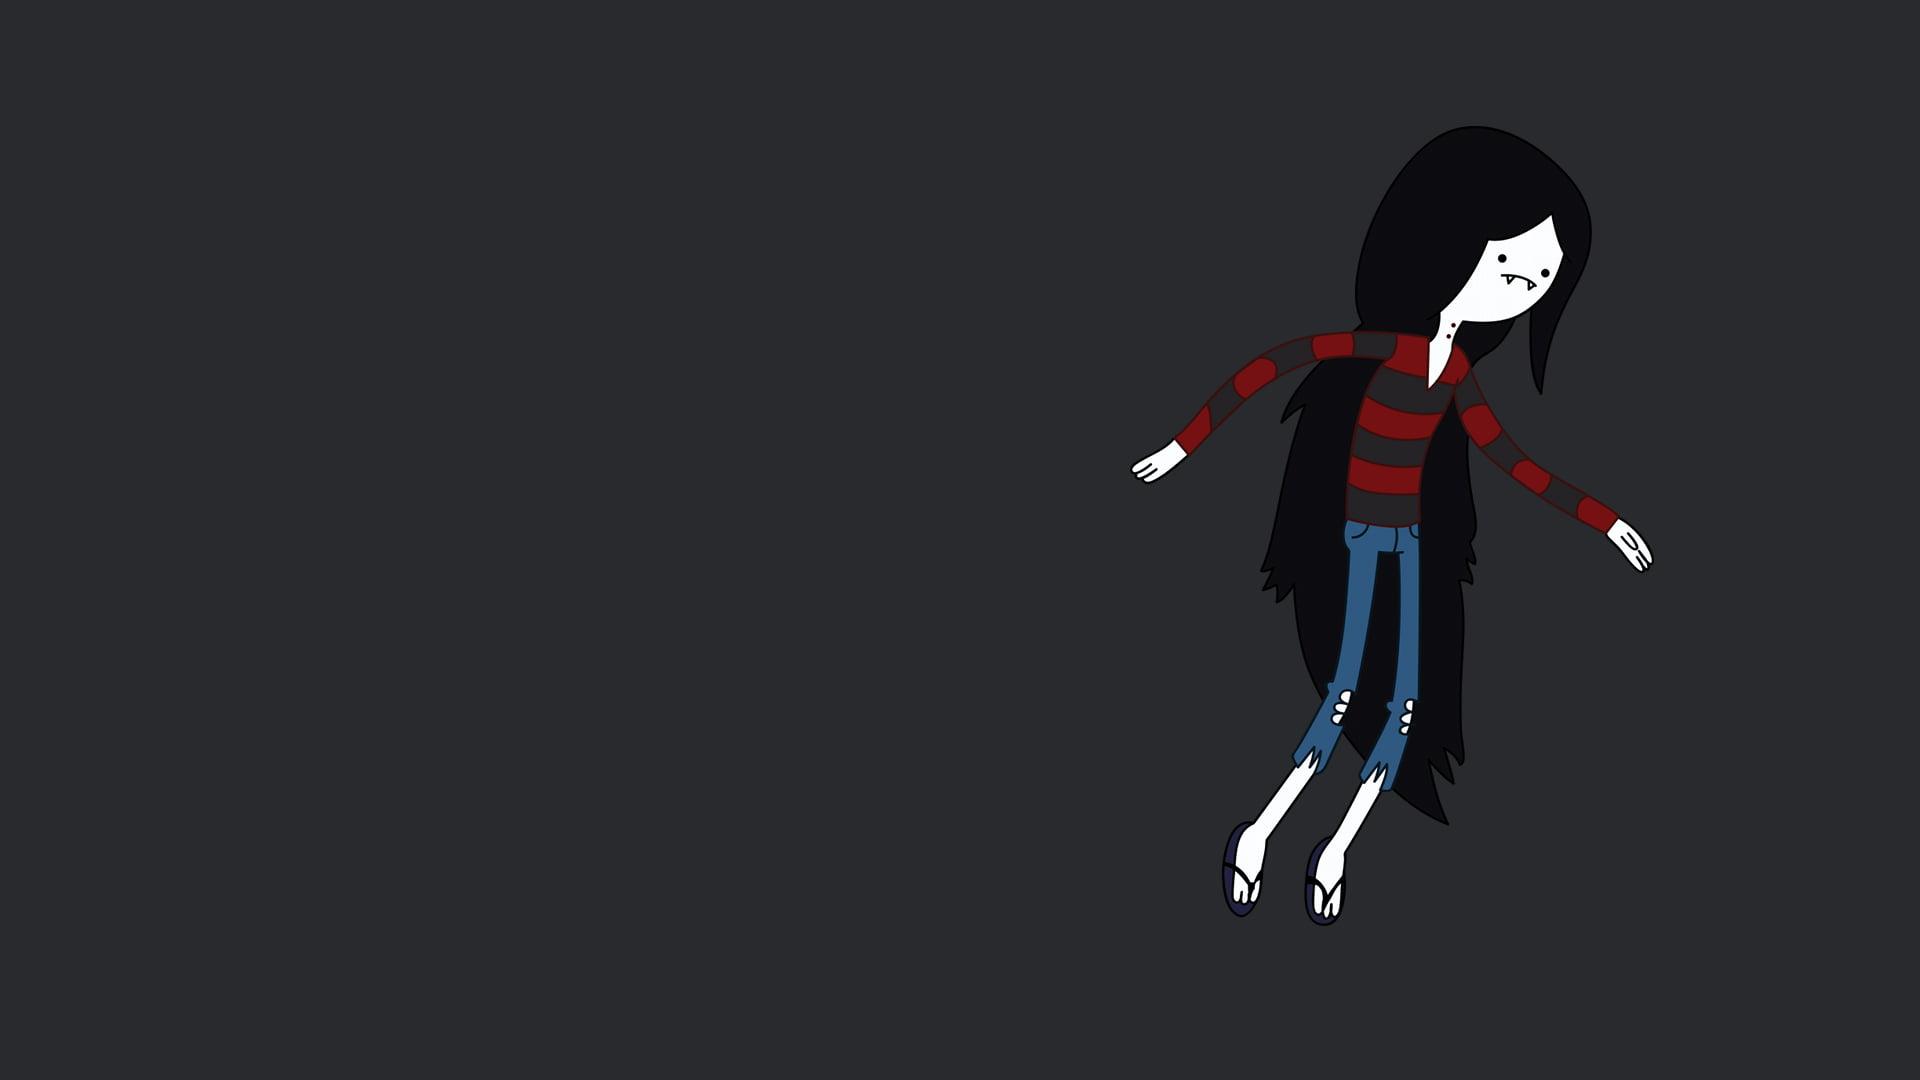 Marceline the Vampire Queen from Adventure Time illustration HD